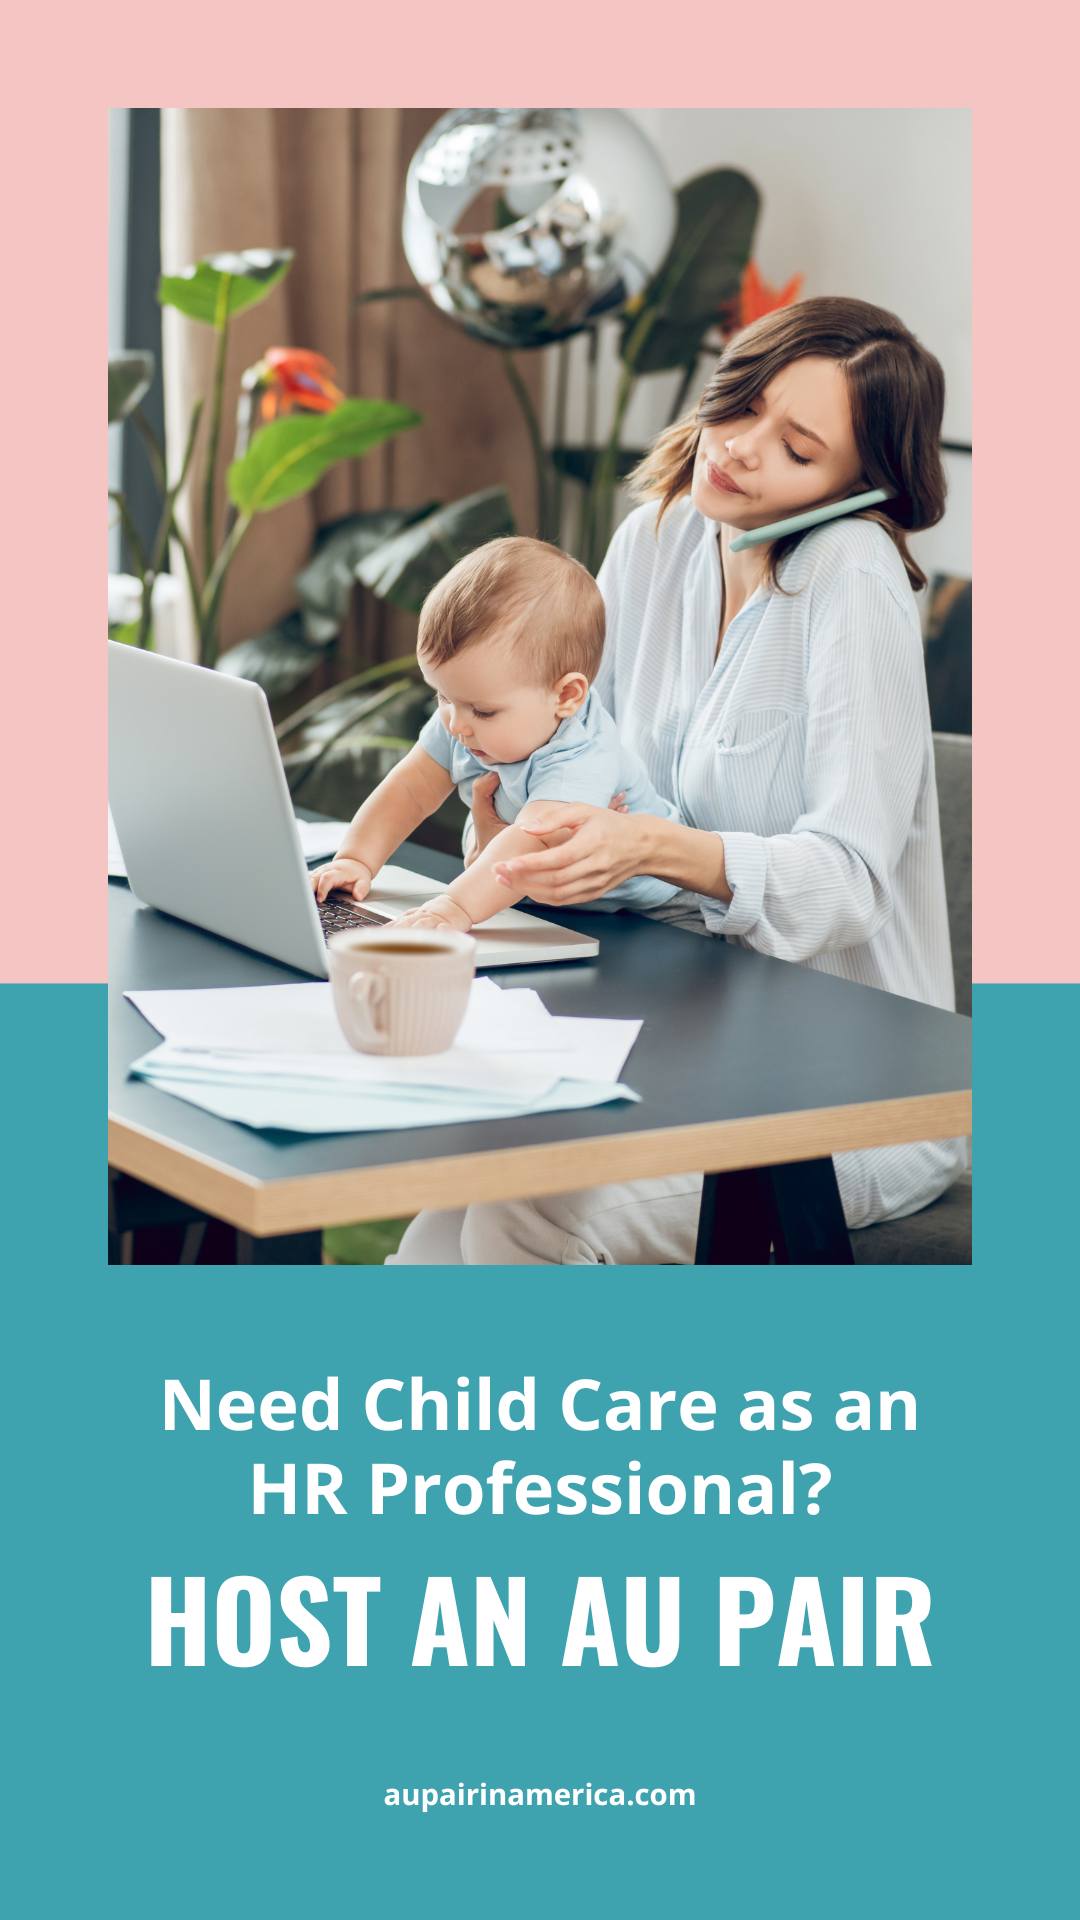 Pin image: Working professional mother with young child with text overlay saying "Need child care as a Human Resources professional? Host an au pair!"